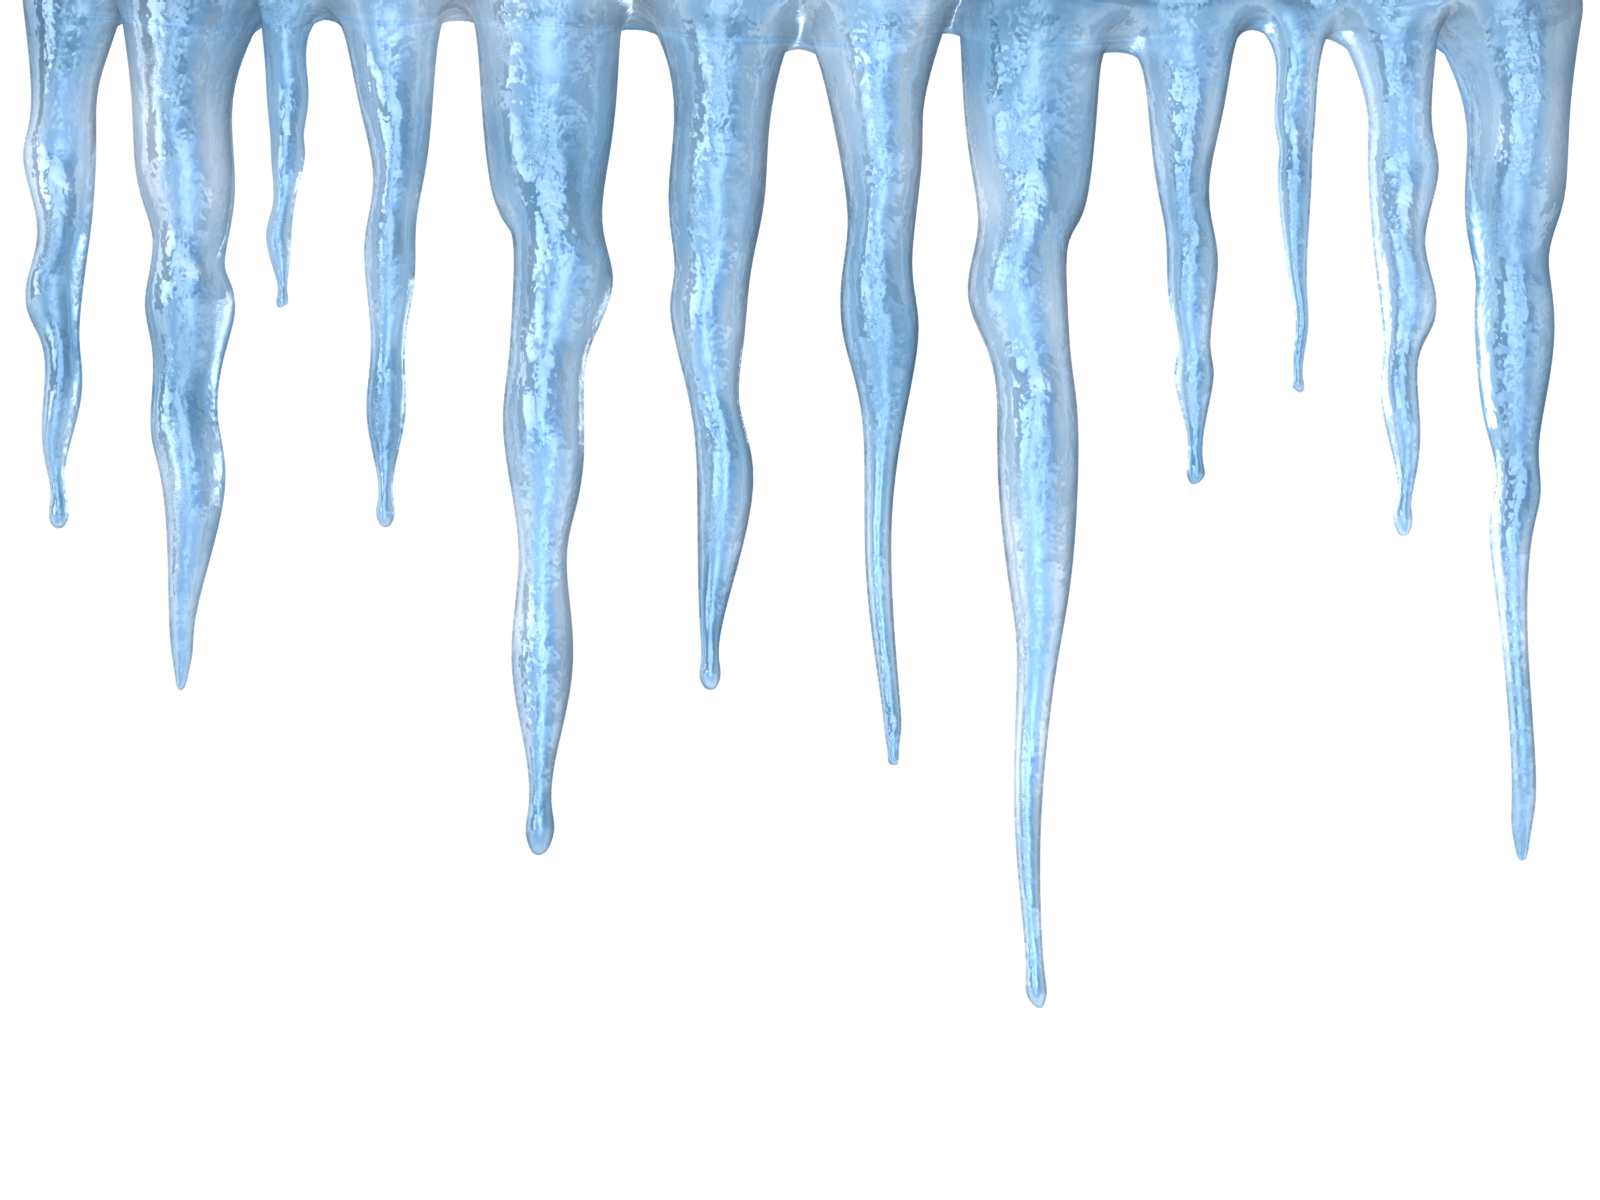 Icicle Clip Art Melted Png Download 1600 10 Free Transparent Icicle Png Download Clip Art Library